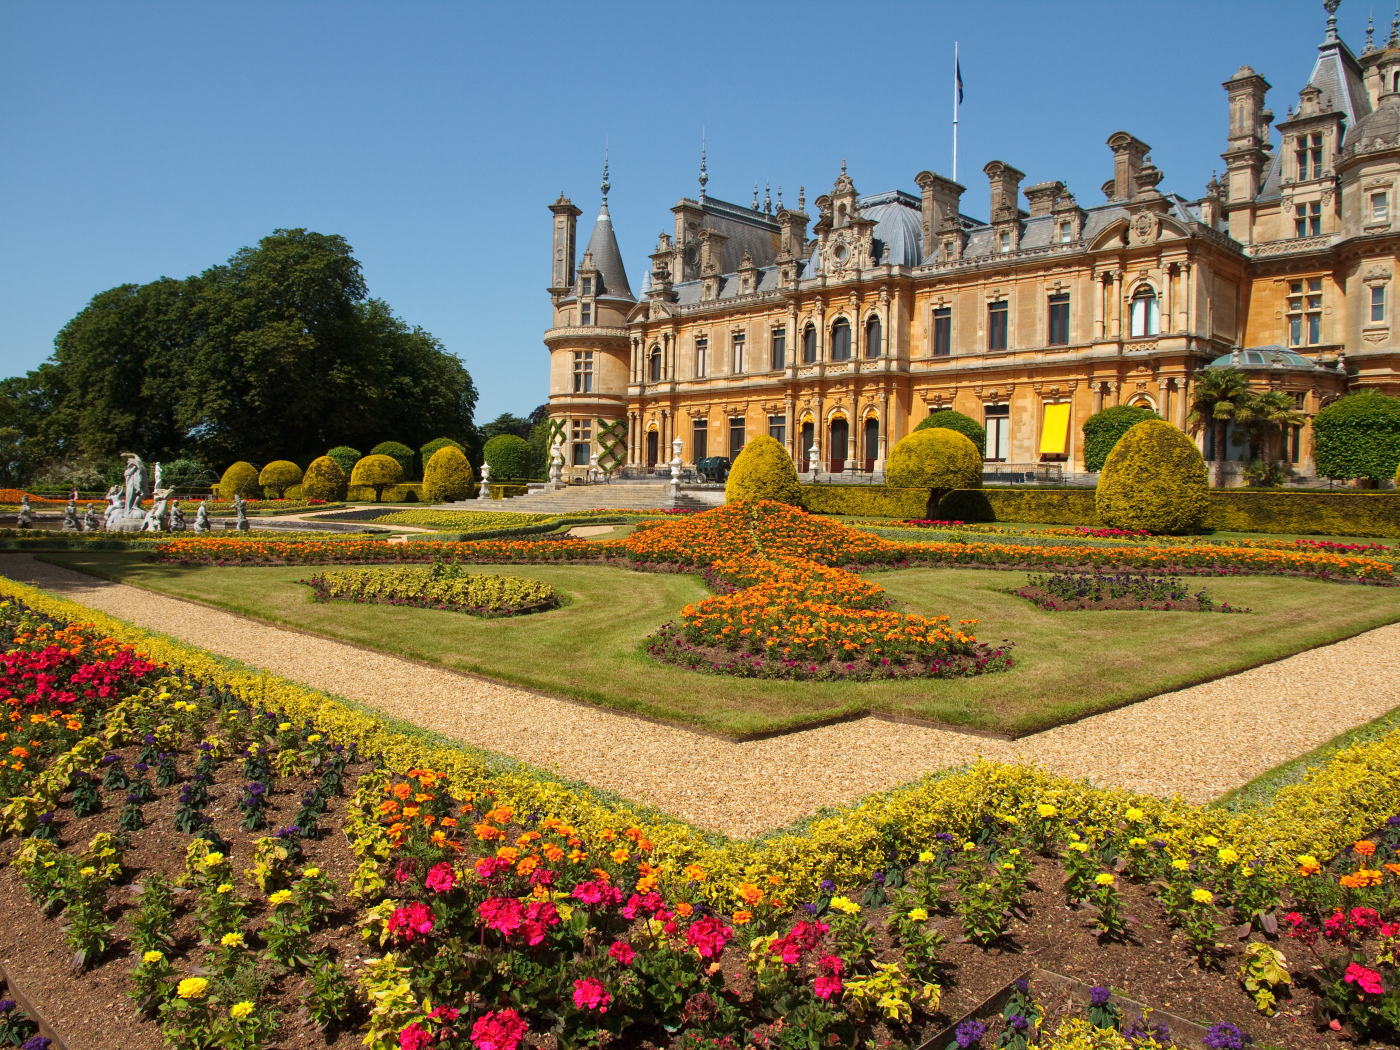 Beautiful Palace Waddesdon Estate with flowers in flower beds